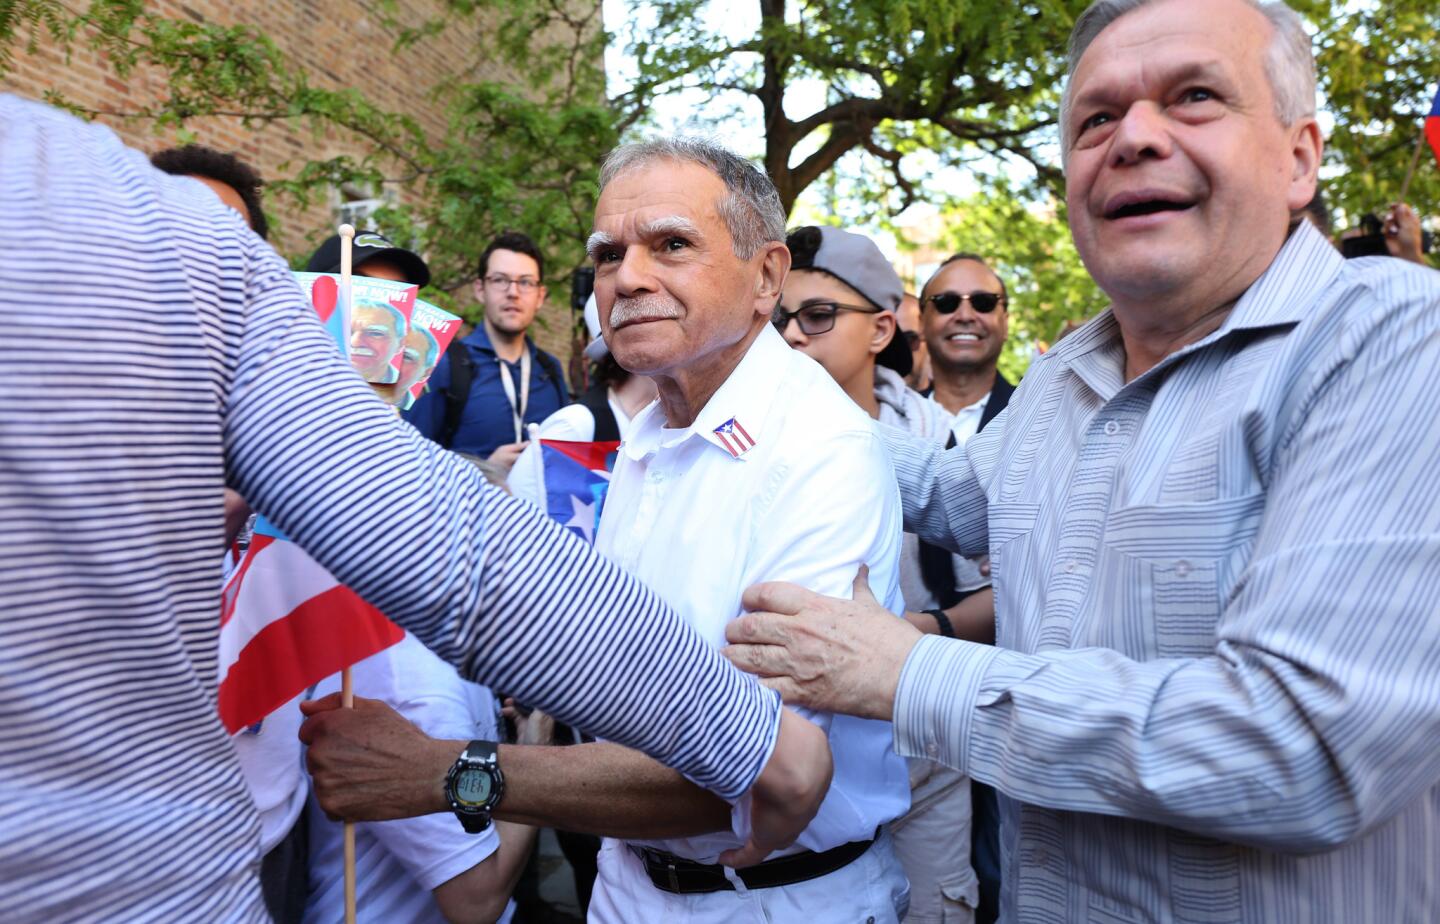 Oscar Lopez Rivera, center, is led by his brother Jose Lopez, right, into La Casita de Don Pedro in his first stop in Humboldt Park on May 18, 2017. President Barack Obama commuted Lopez's 70-year prison term in January, clearing the way for his early release.